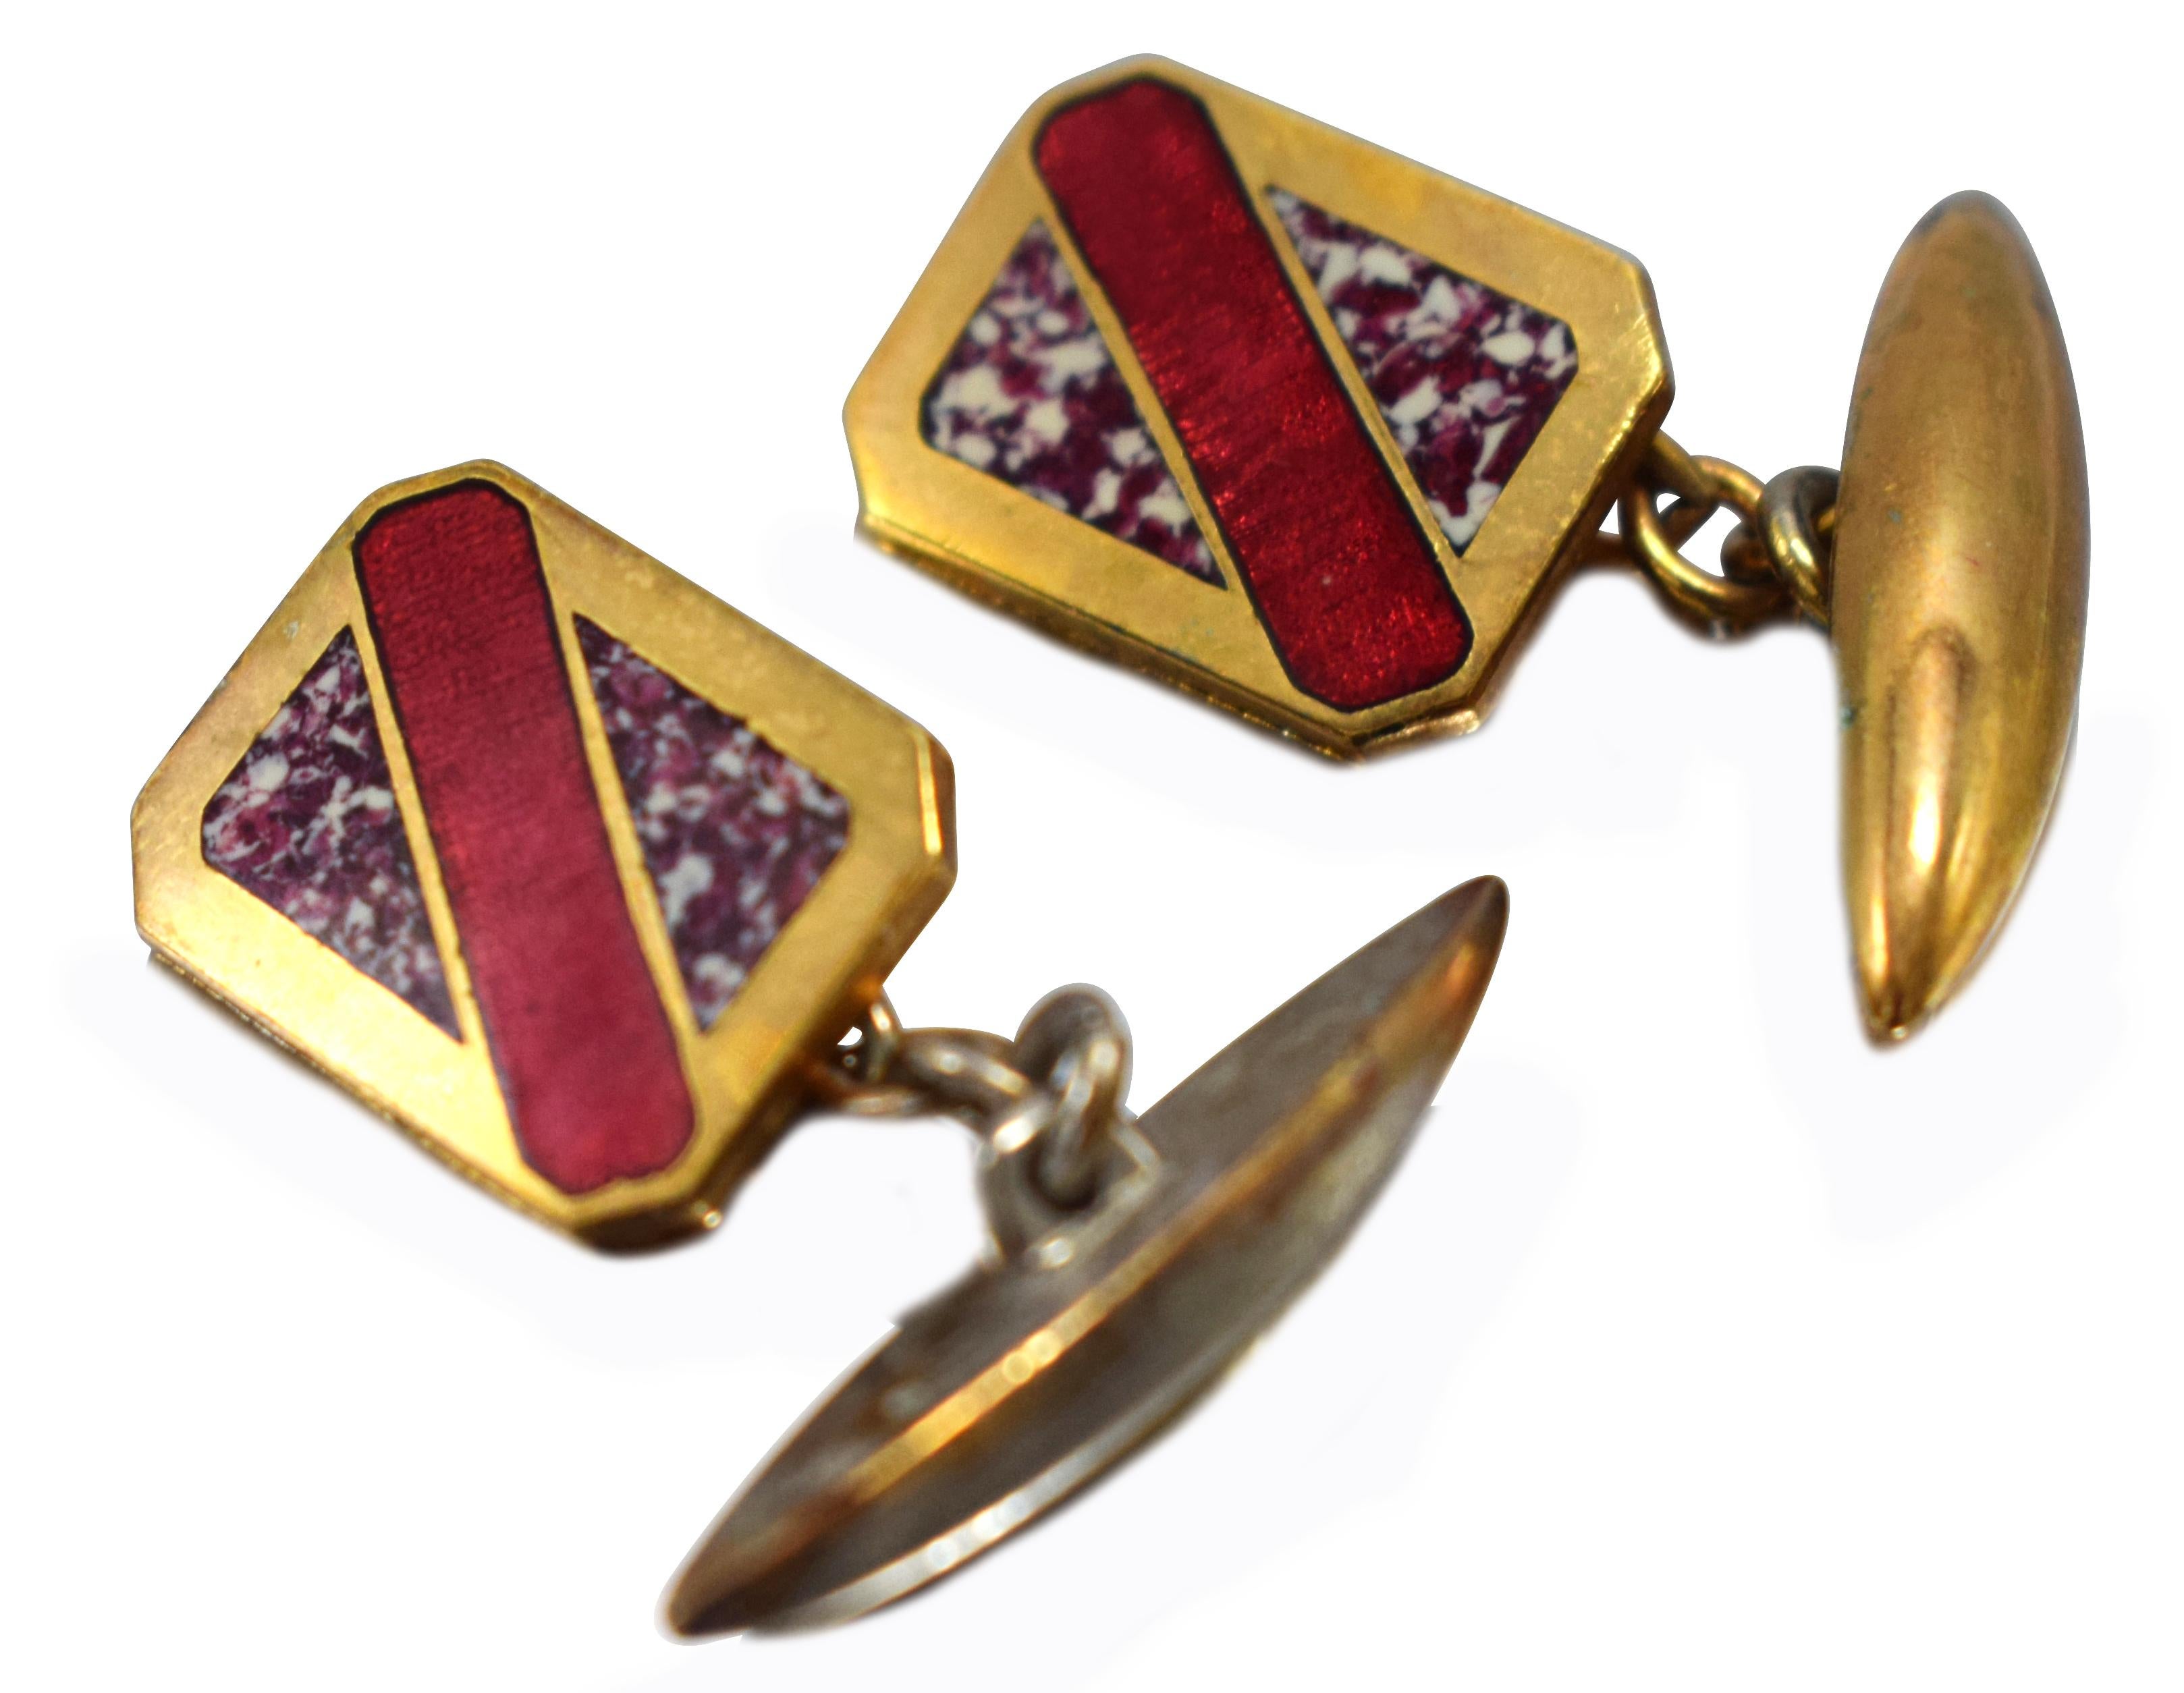 Great Art Deco geometric styling and colour, can't be confused with any other era can they? Condition is great with very mid signs of usage. Originating from England and ideal for any modern dapper gentleman. All of our cufflinks are sent out in a